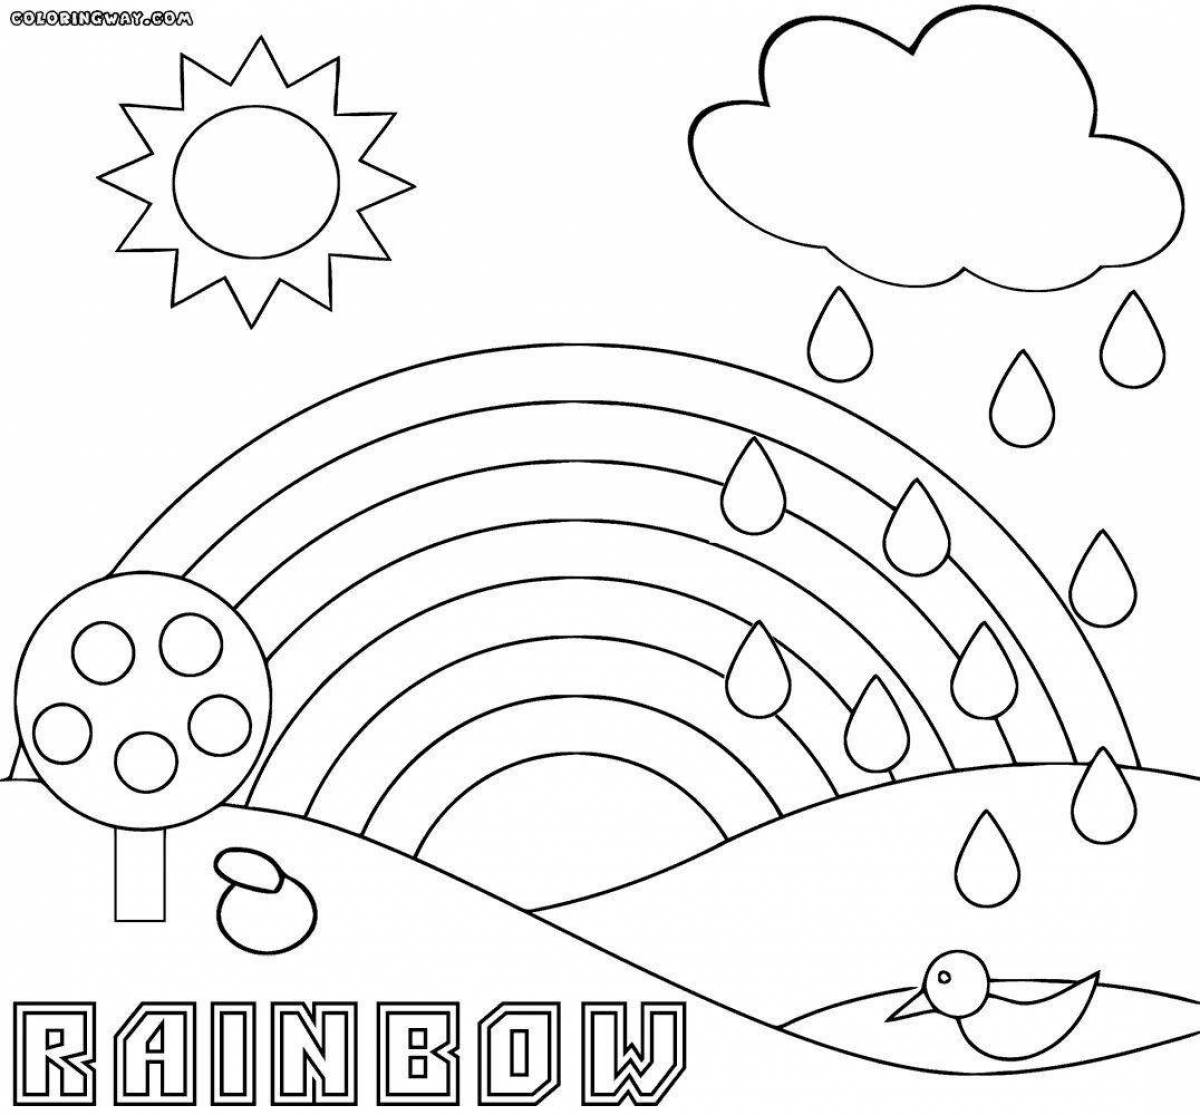 Fantastic rainbow coloring book for kids